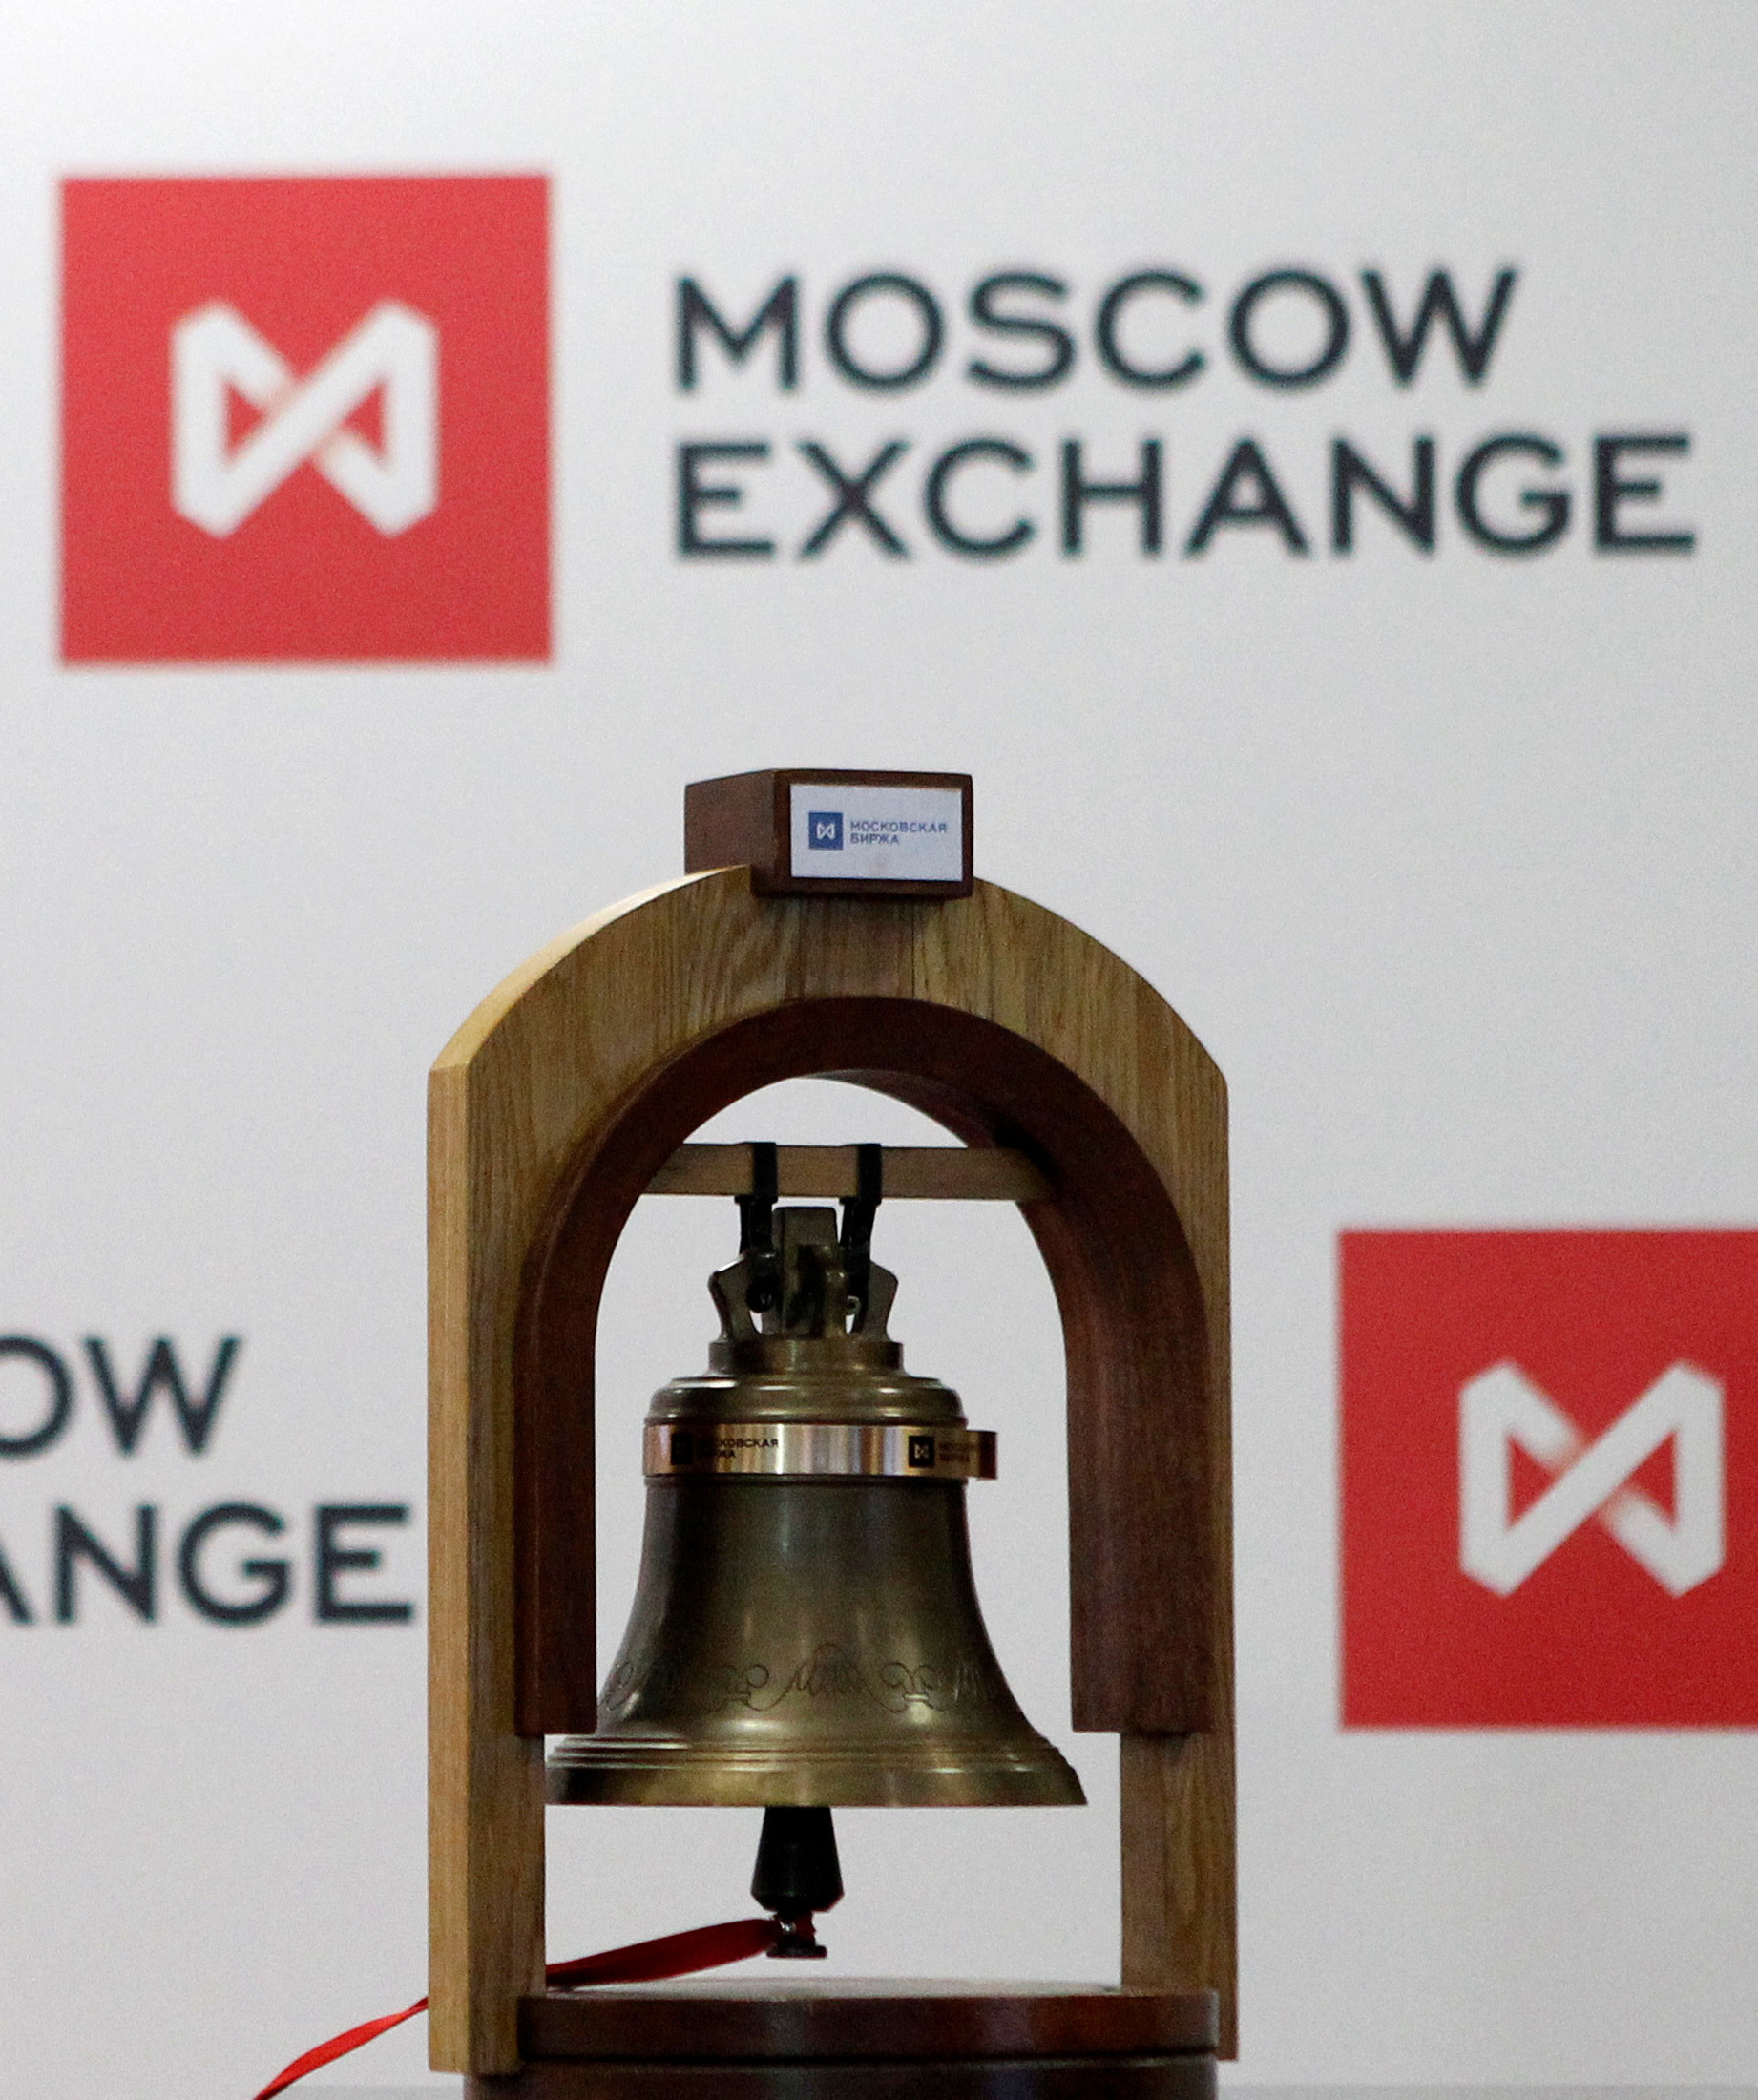 The bell rung at the beginning of trading sessions is seen in front of the logo of the Moscow Exchange after the start of trading in Moscow